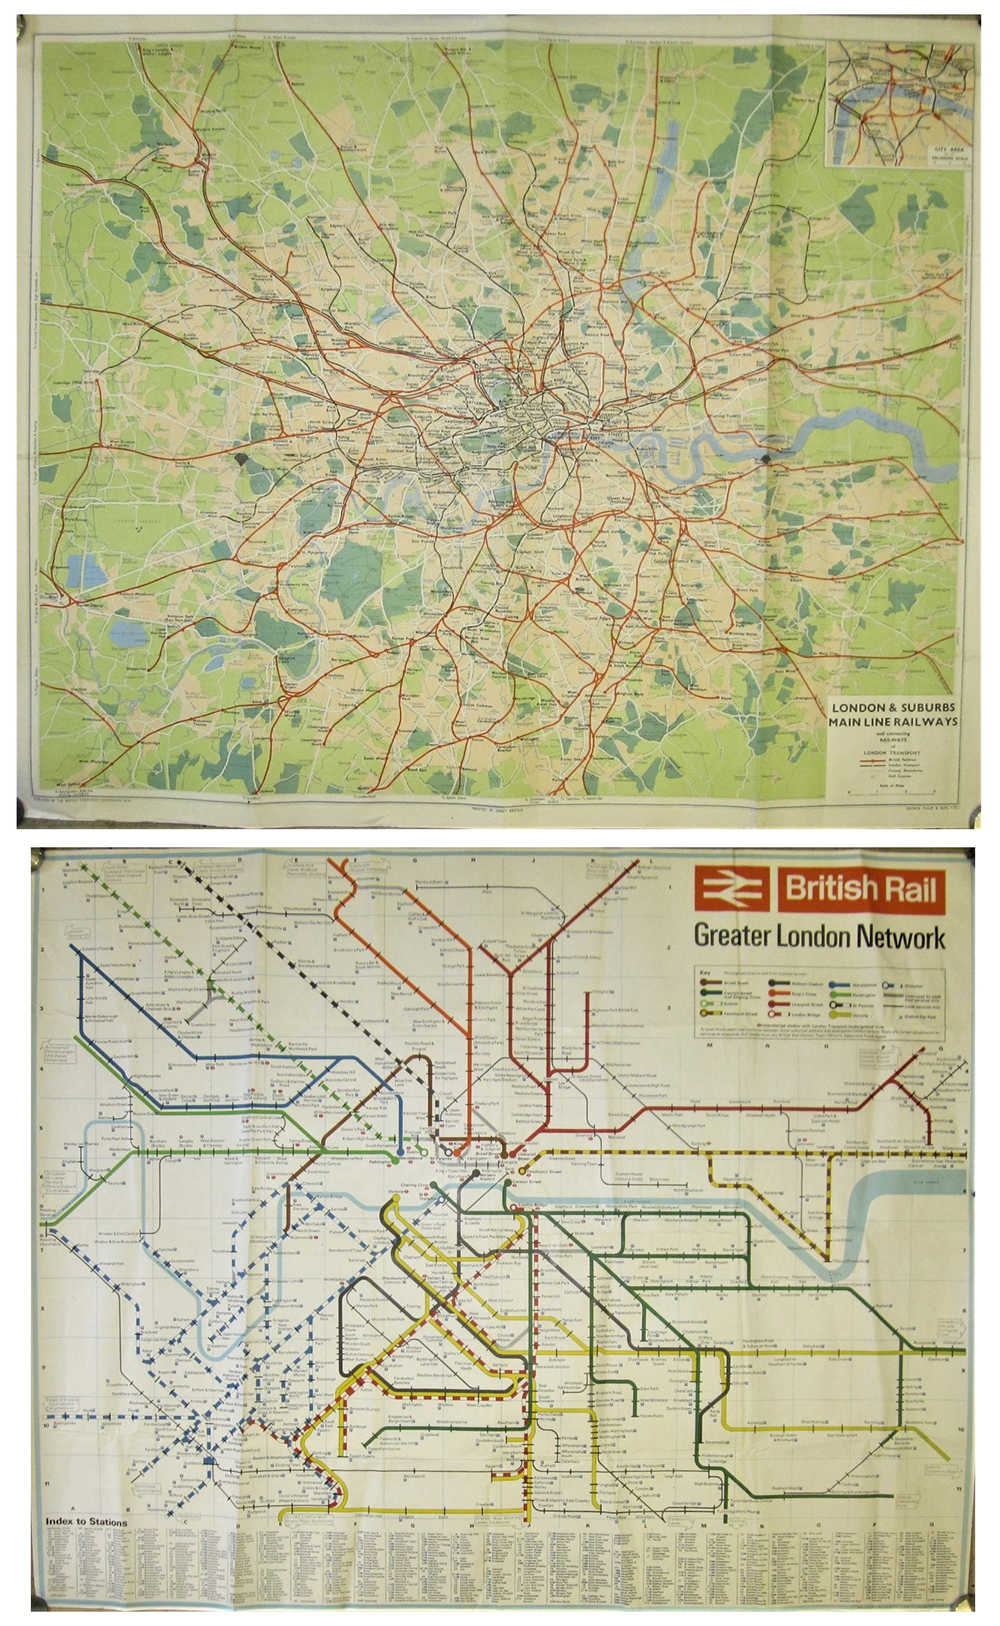 A Lot containing 4 x poster maps. 2 x Quad Royal posters of LONDON SUBURBS main line railways with